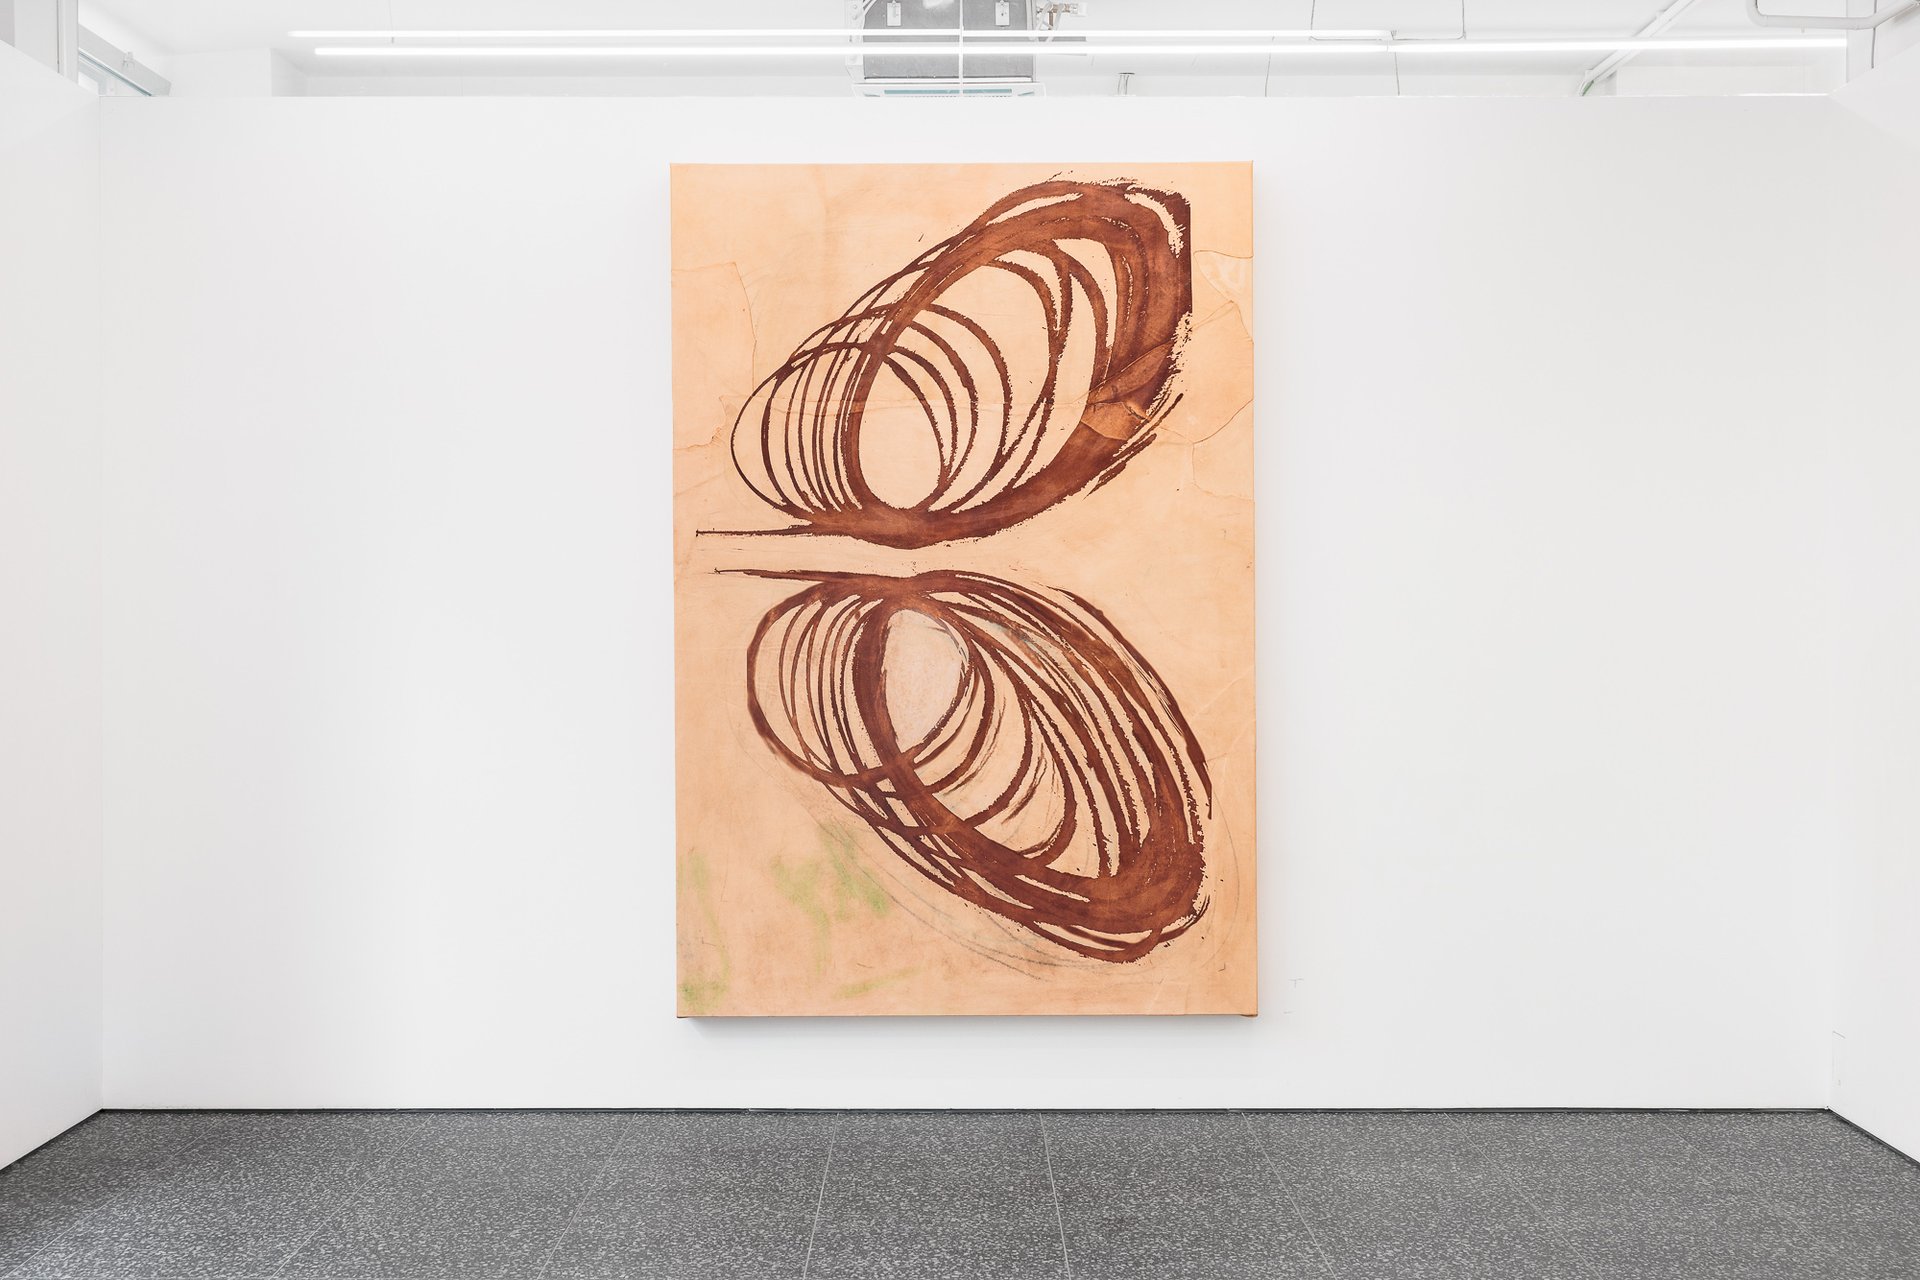 Lena HenkeCombustions 18 [Two Wheeler], 2024Laser etched leather, pigment on wooden panel250 x 170 x 15 cm